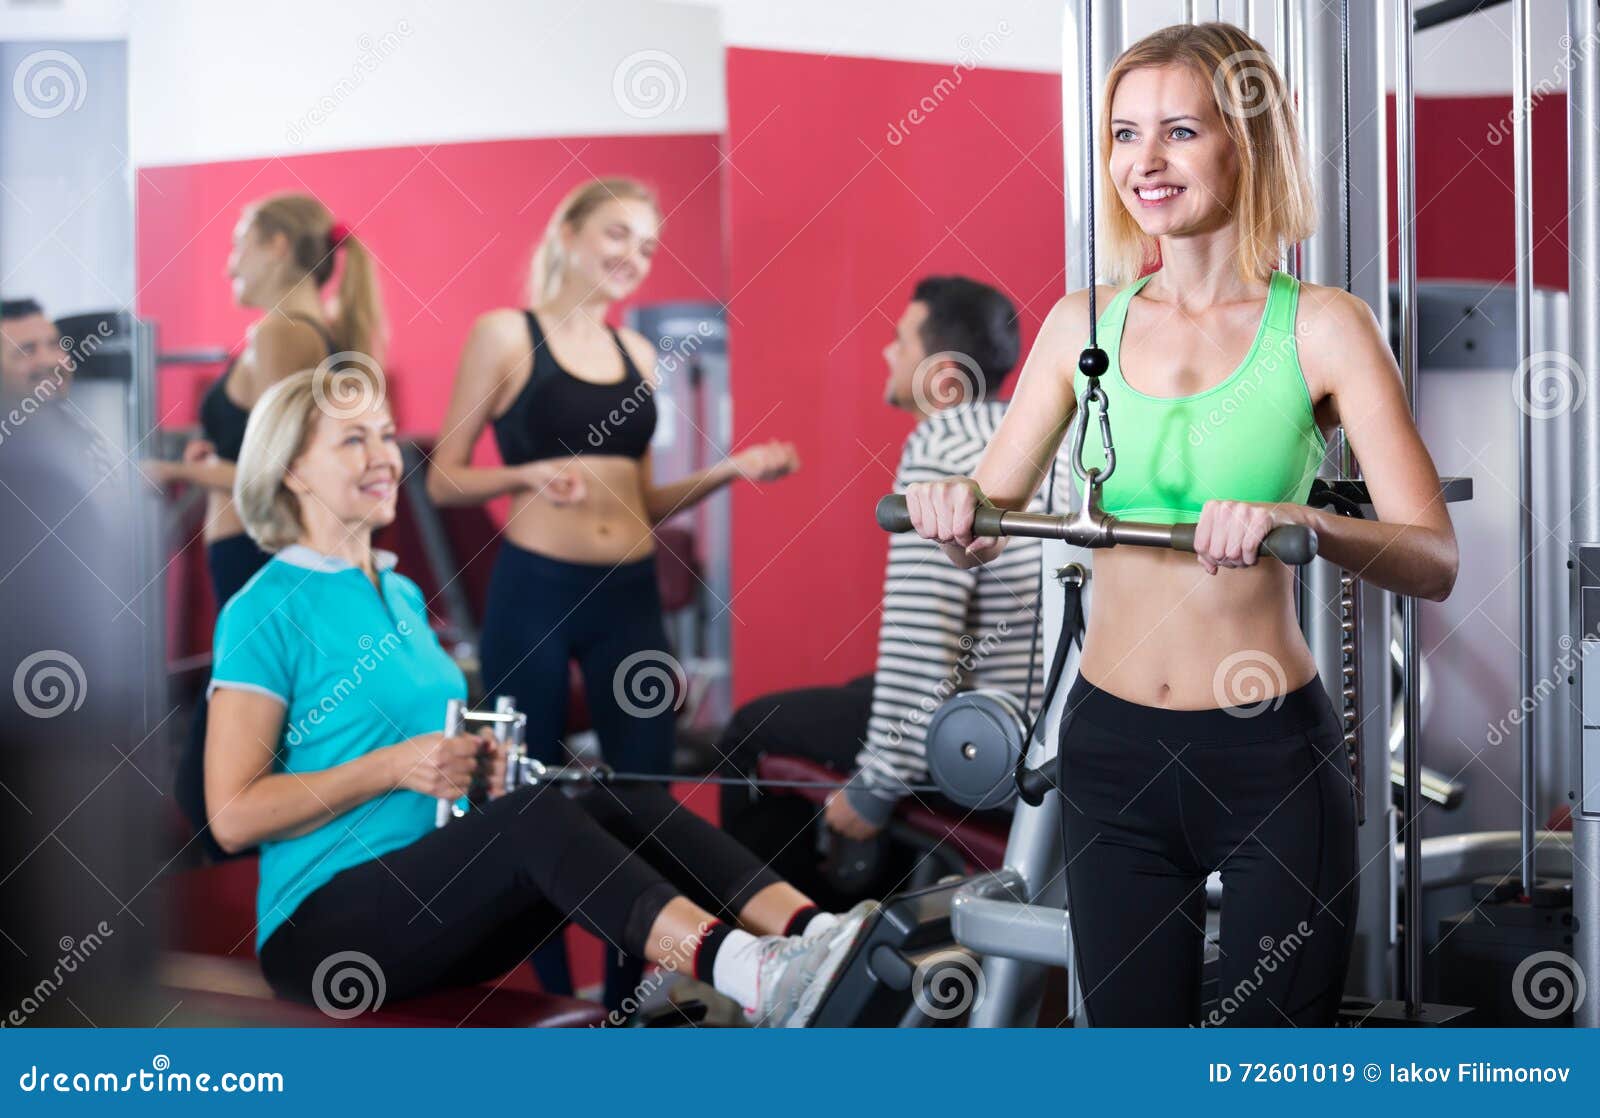 Adults working out in gym stock image. Image of hobby - 72601019